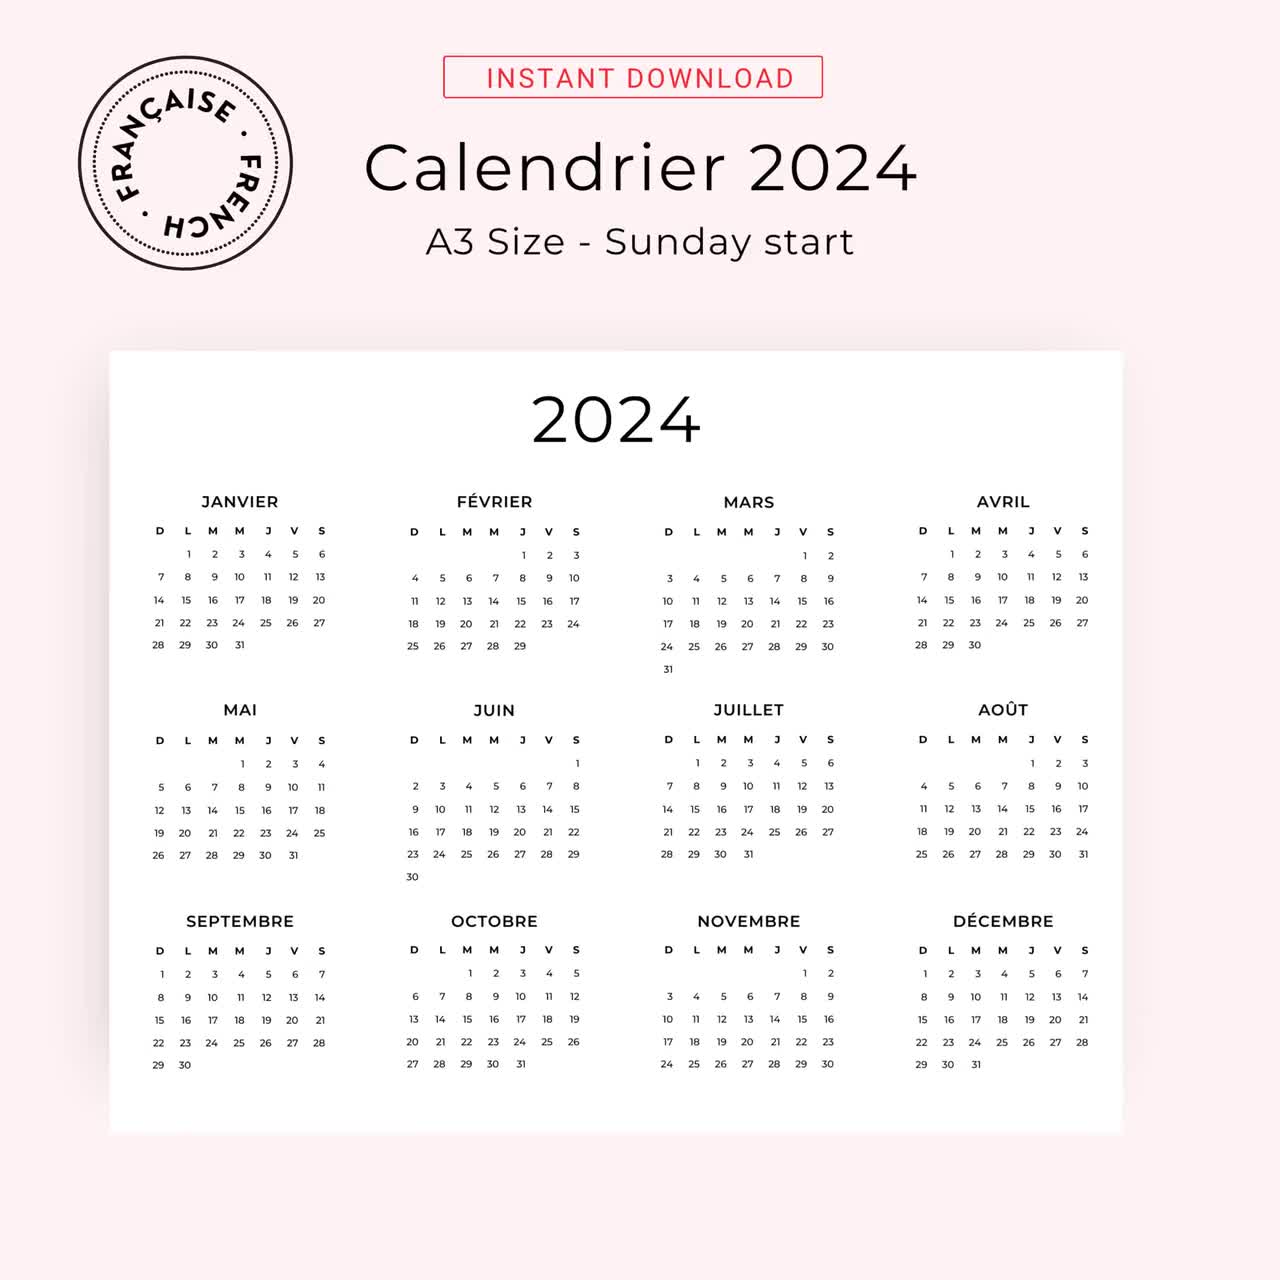 2024 Calendrier 2024 French Calendar Landscape 2024 Yearly Calendar